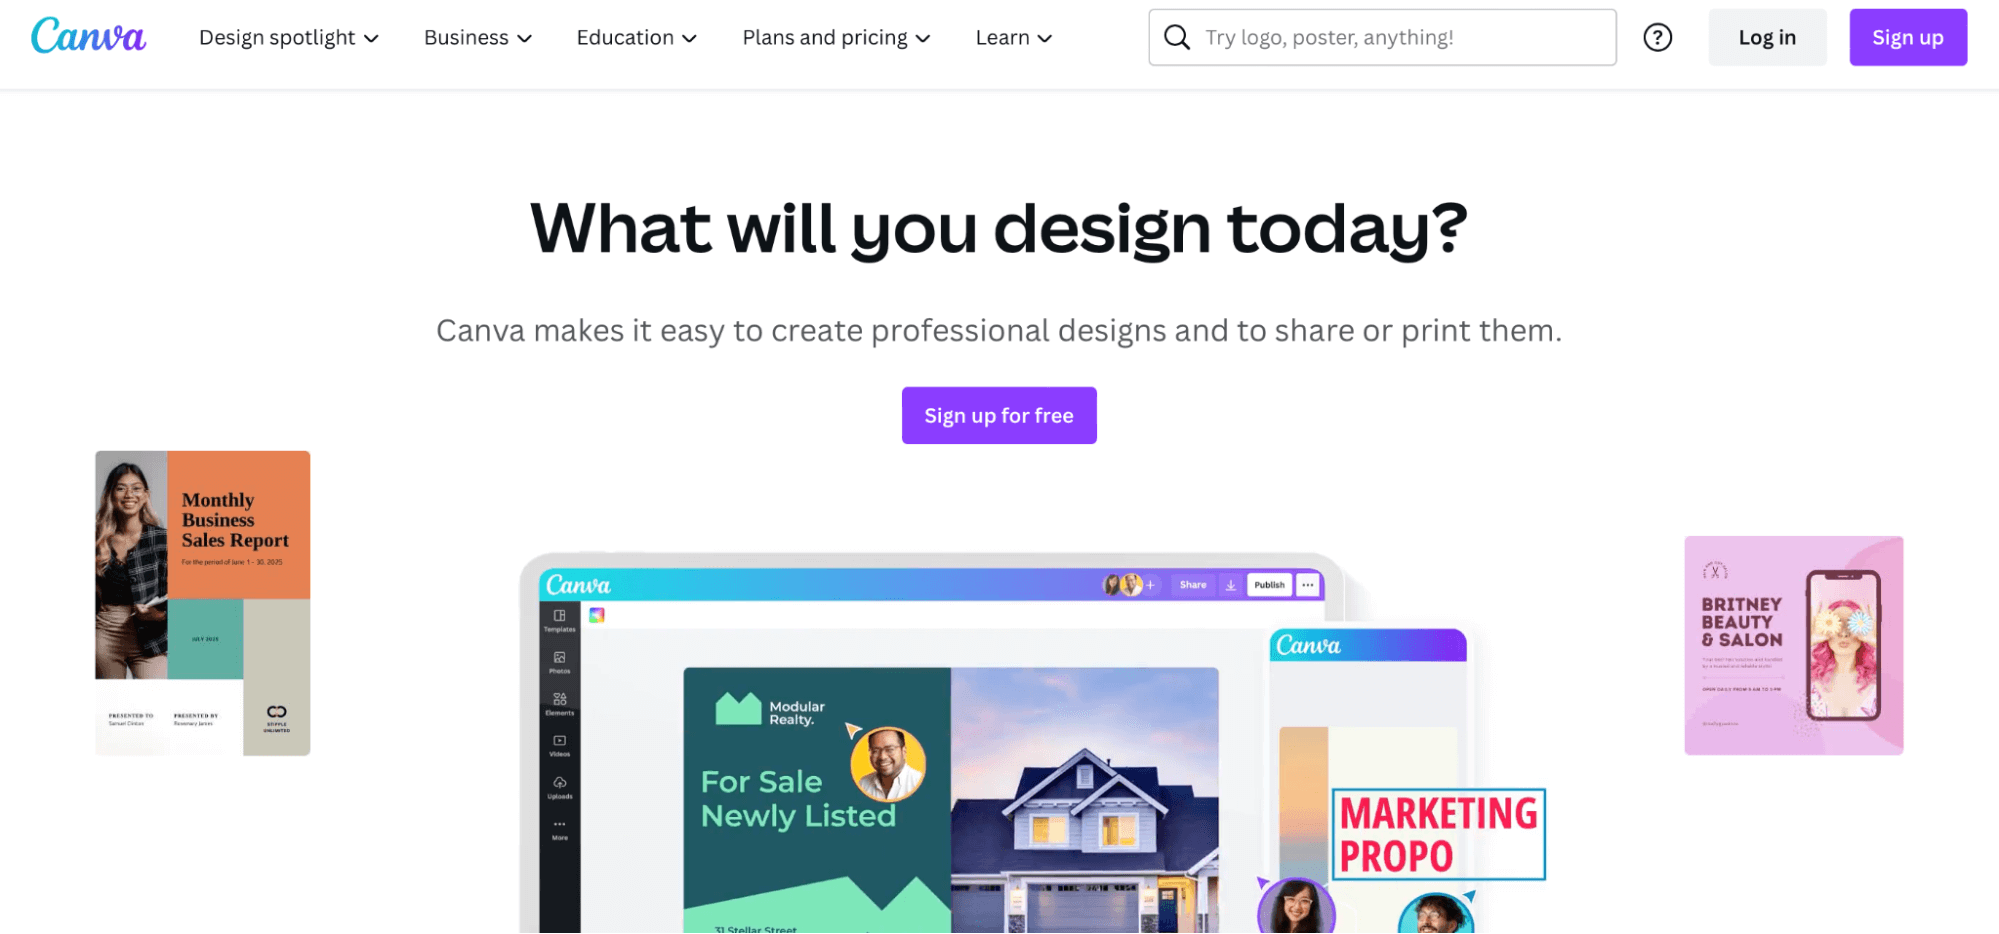 Canva: What will you design today? 